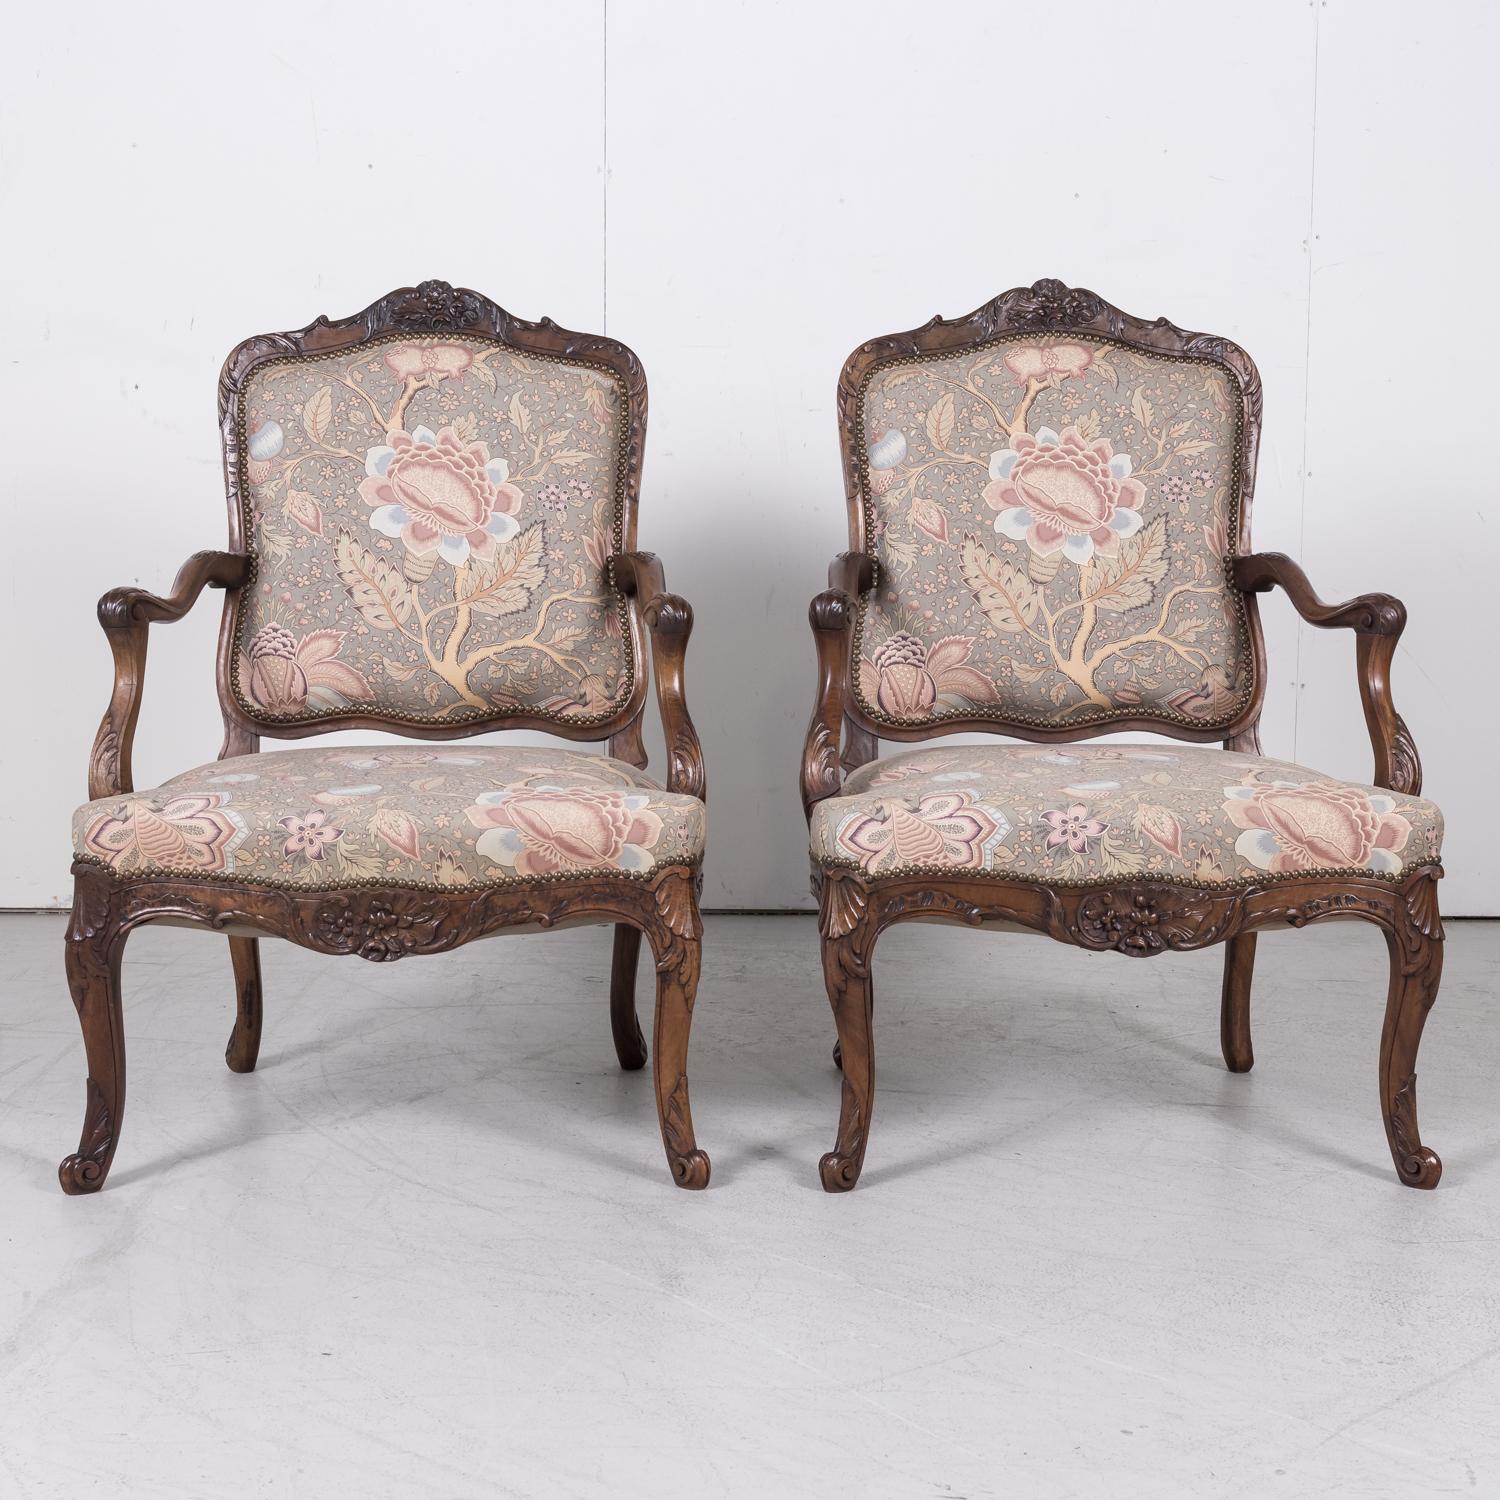 Mid-18th Century Fine Pair of 18th Century French Louis XV Period Carved Walnut Fauteuils For Sale